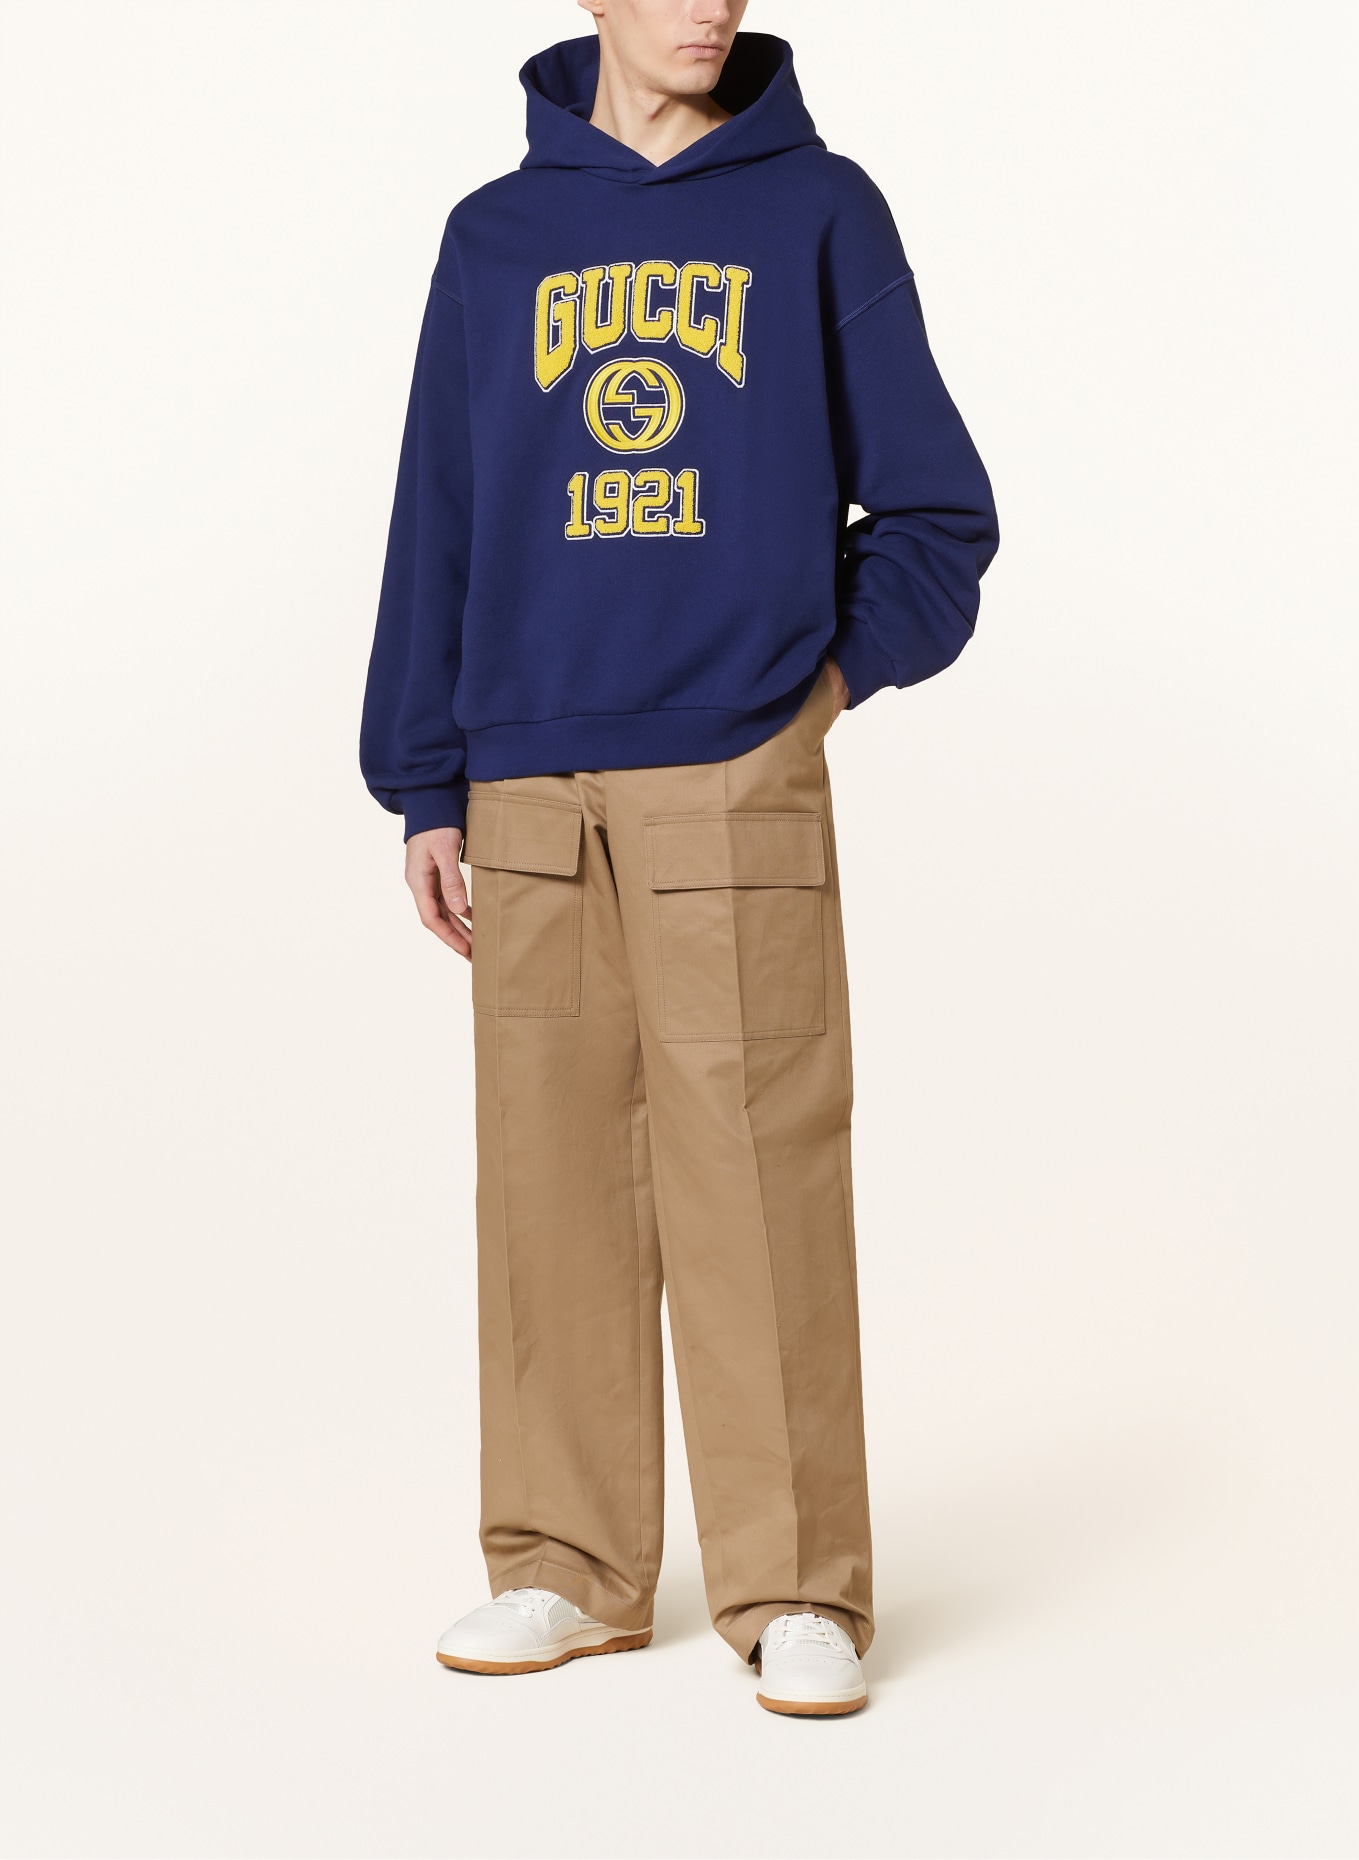 GUCCI Oversized hoodie, Color: DARK BLUE/ YELLOW (Image 2)